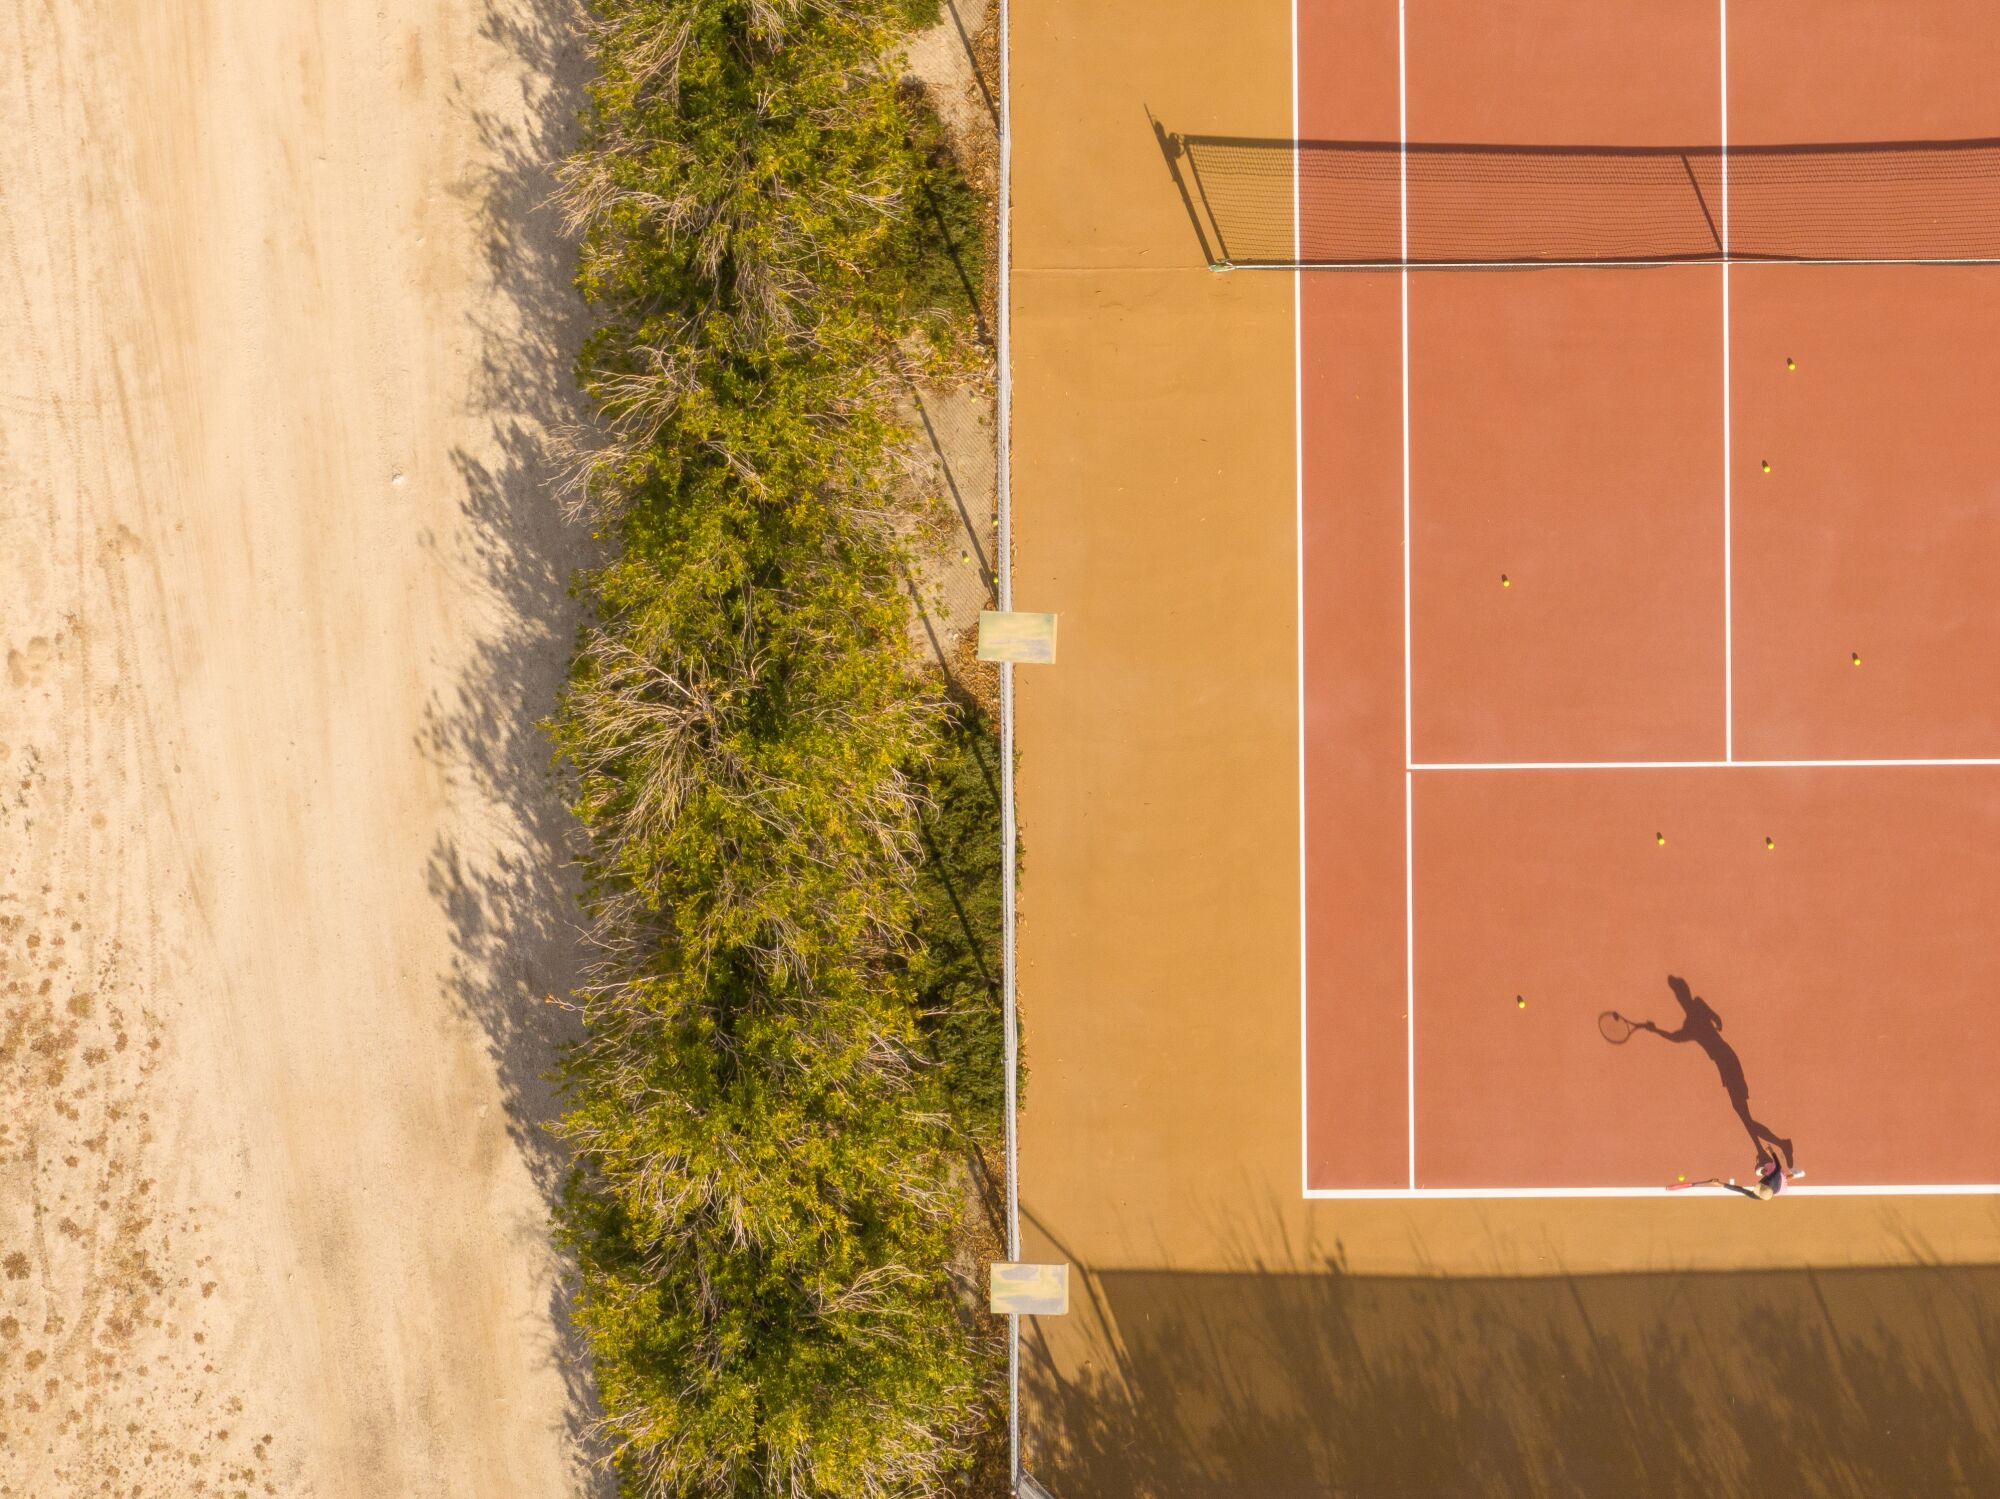 An overhead image of a tennis player and their shadow on a court that sits alongside desert sand and greenery.